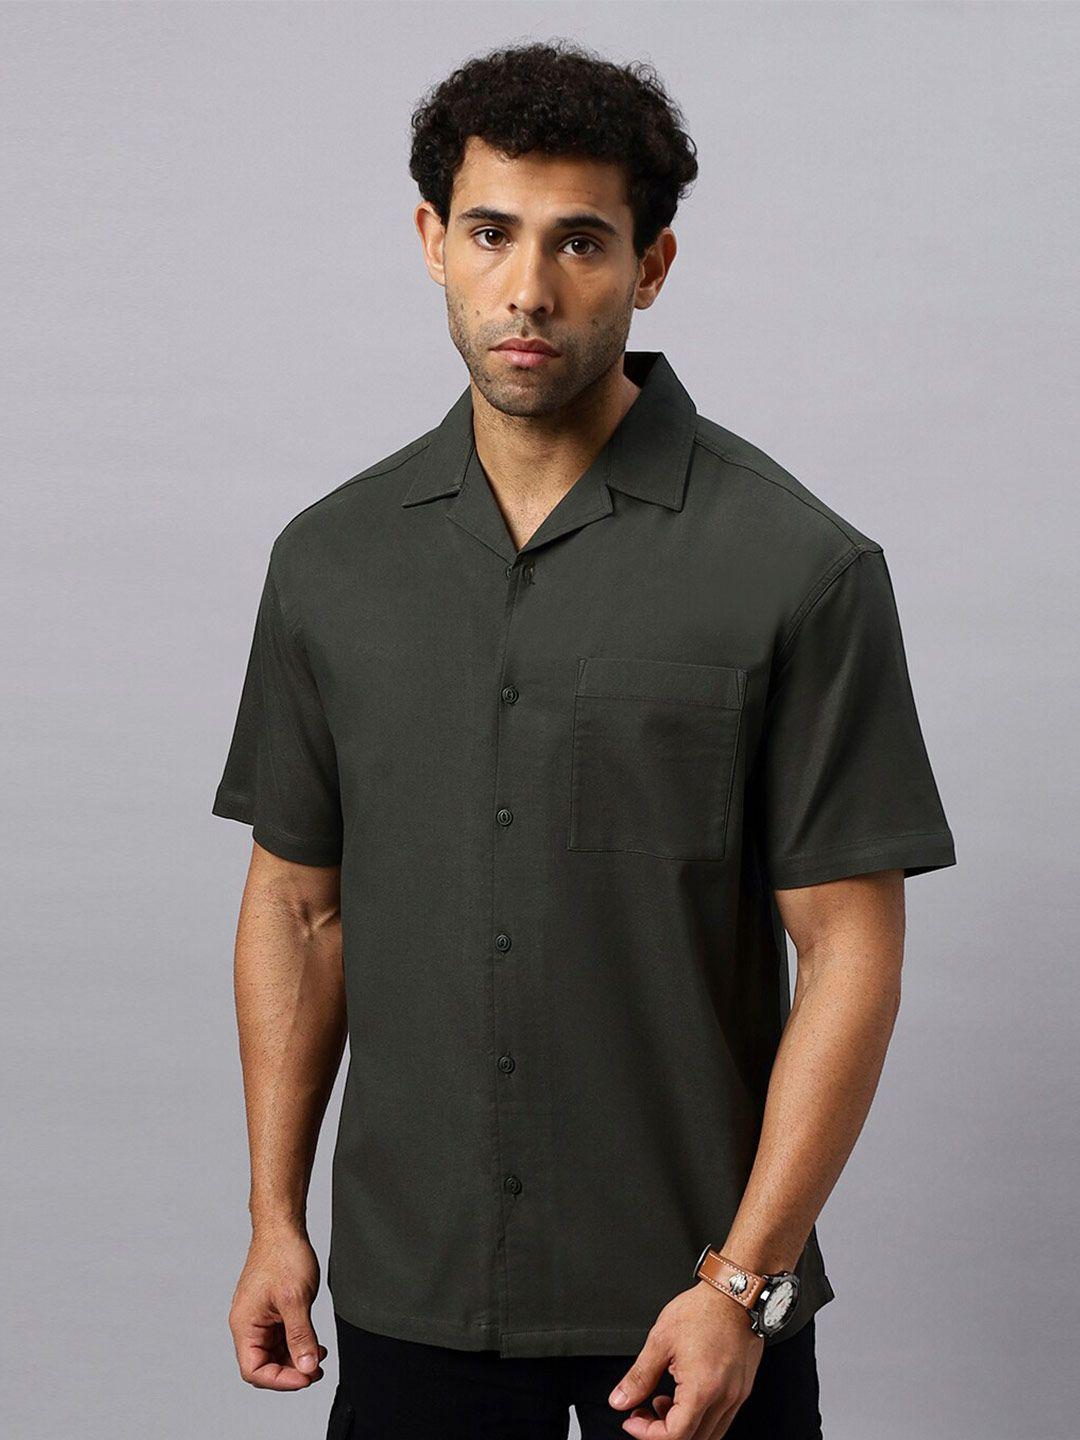 the roadster lifestyle co. relaxed fit cuban collar casual shirt